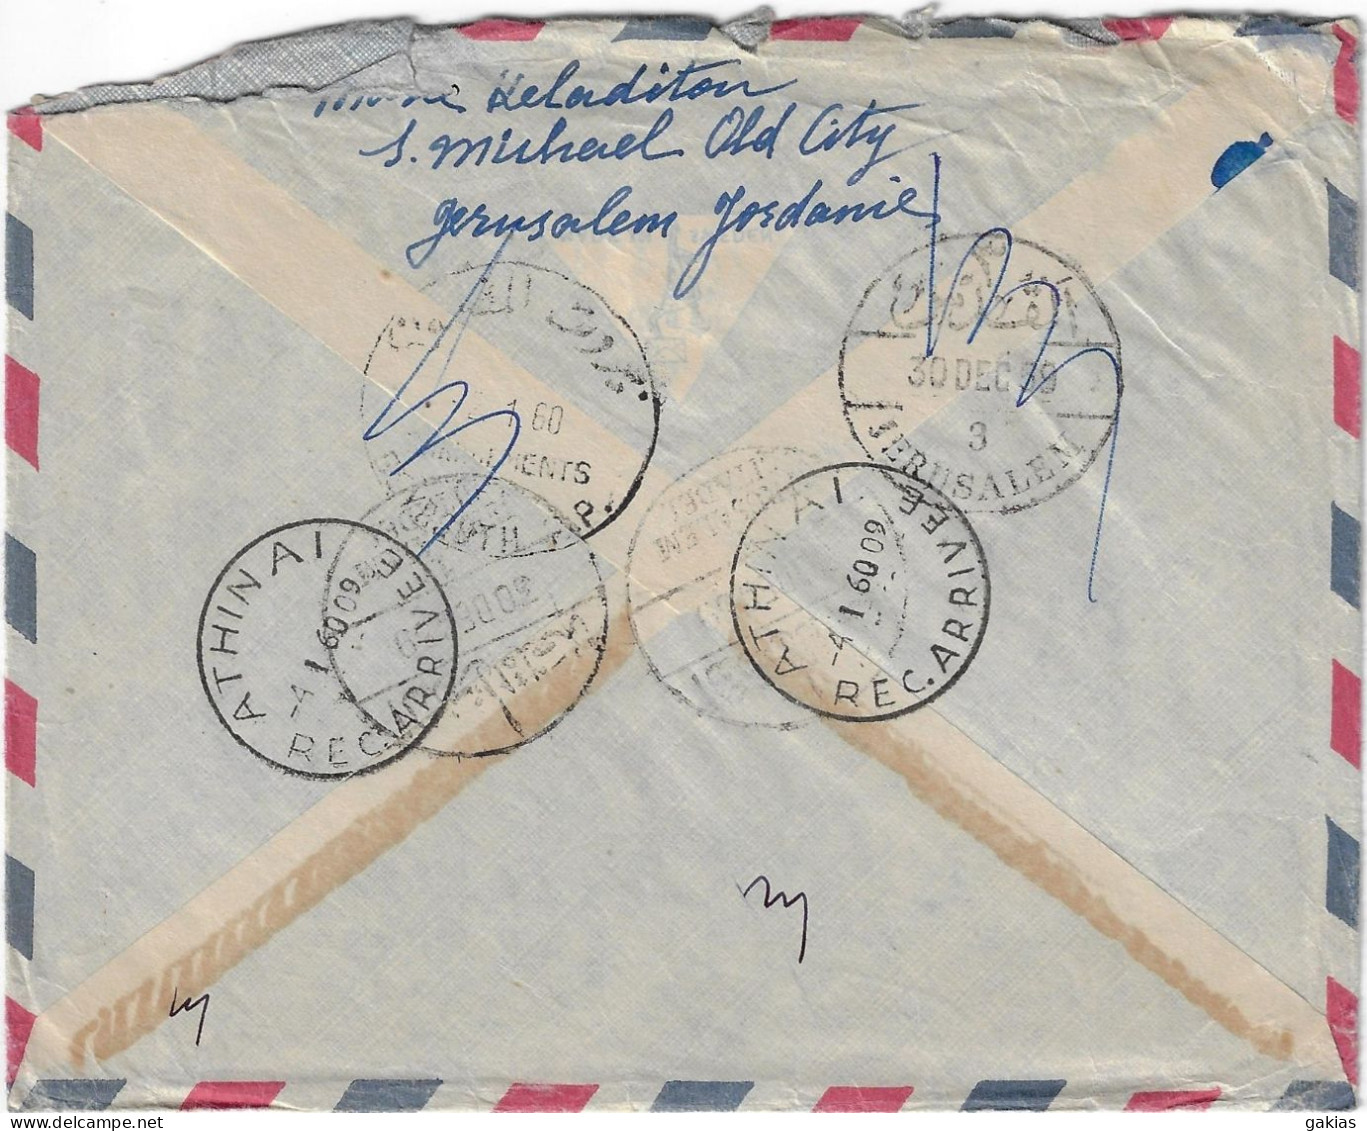 GREECE/ARRIVAL, 30-12-1959 REG. AIR COVER JERUSALEM/JORDAN VIA BEYROUTH TO ATHENS. WITH CONTENTS. - Lettres & Documents